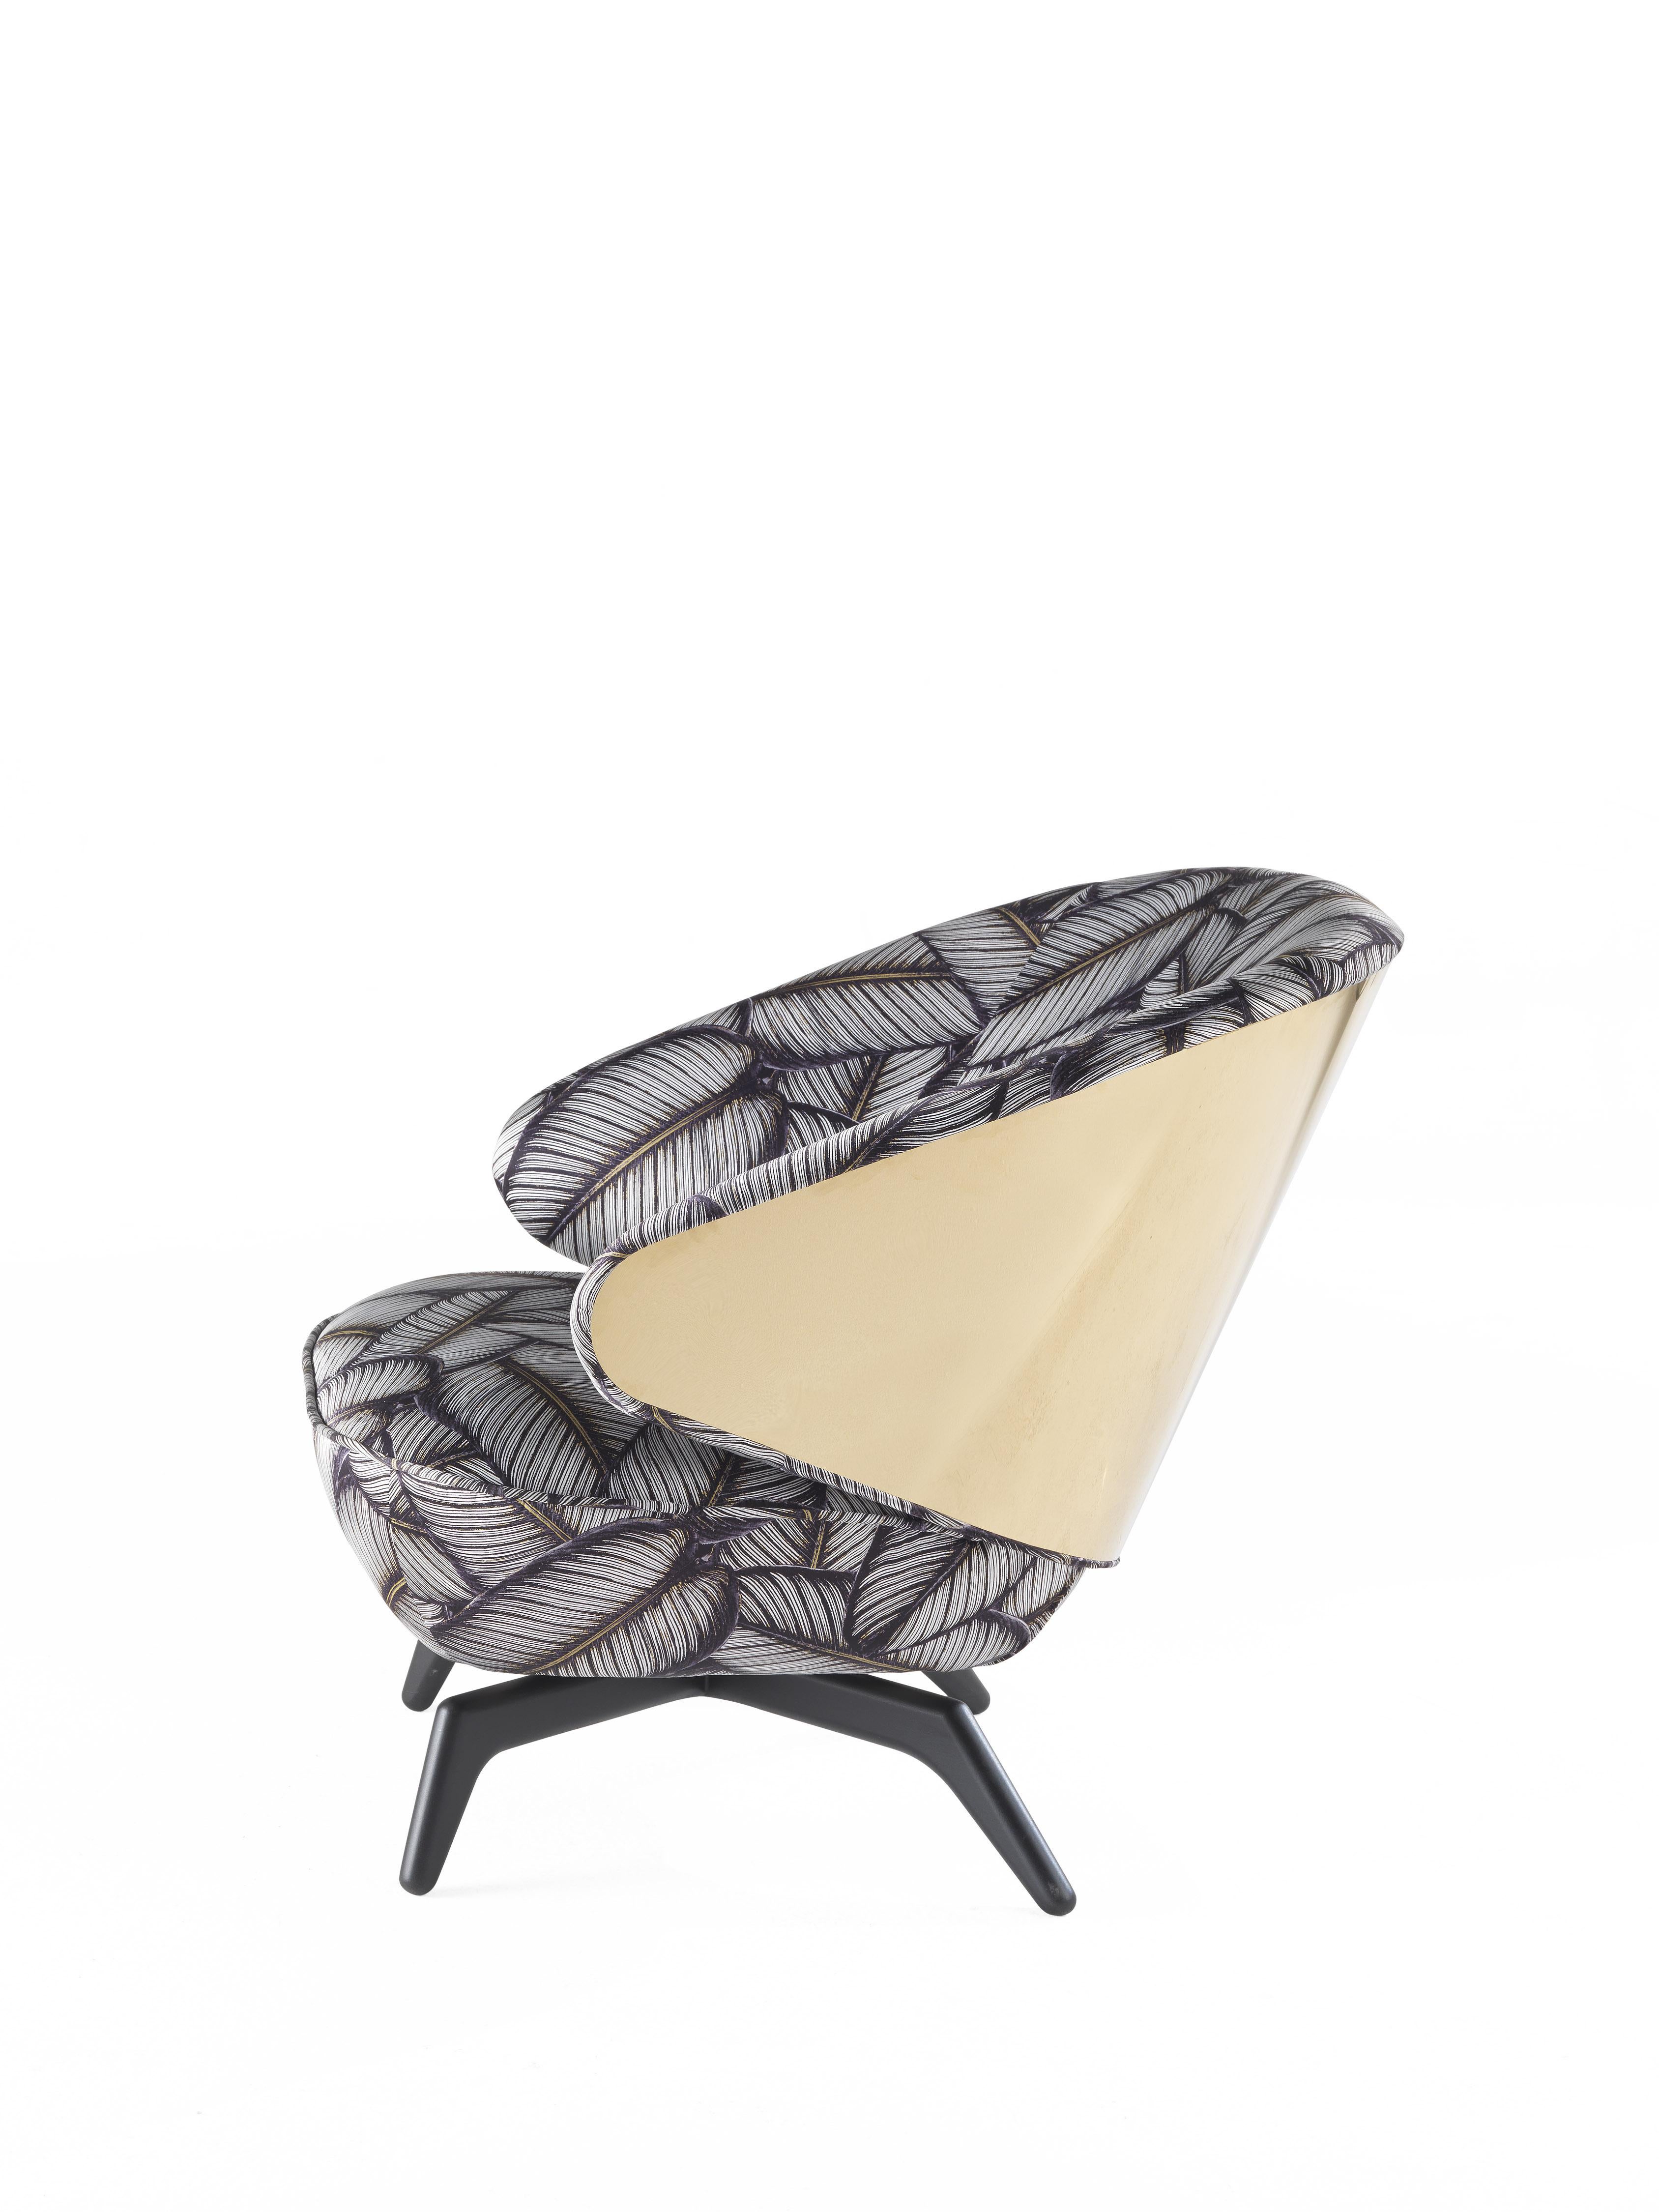 Modern 21st Century Key West Armchair in Silk by Roberto Cavalli Home Interiors  For Sale